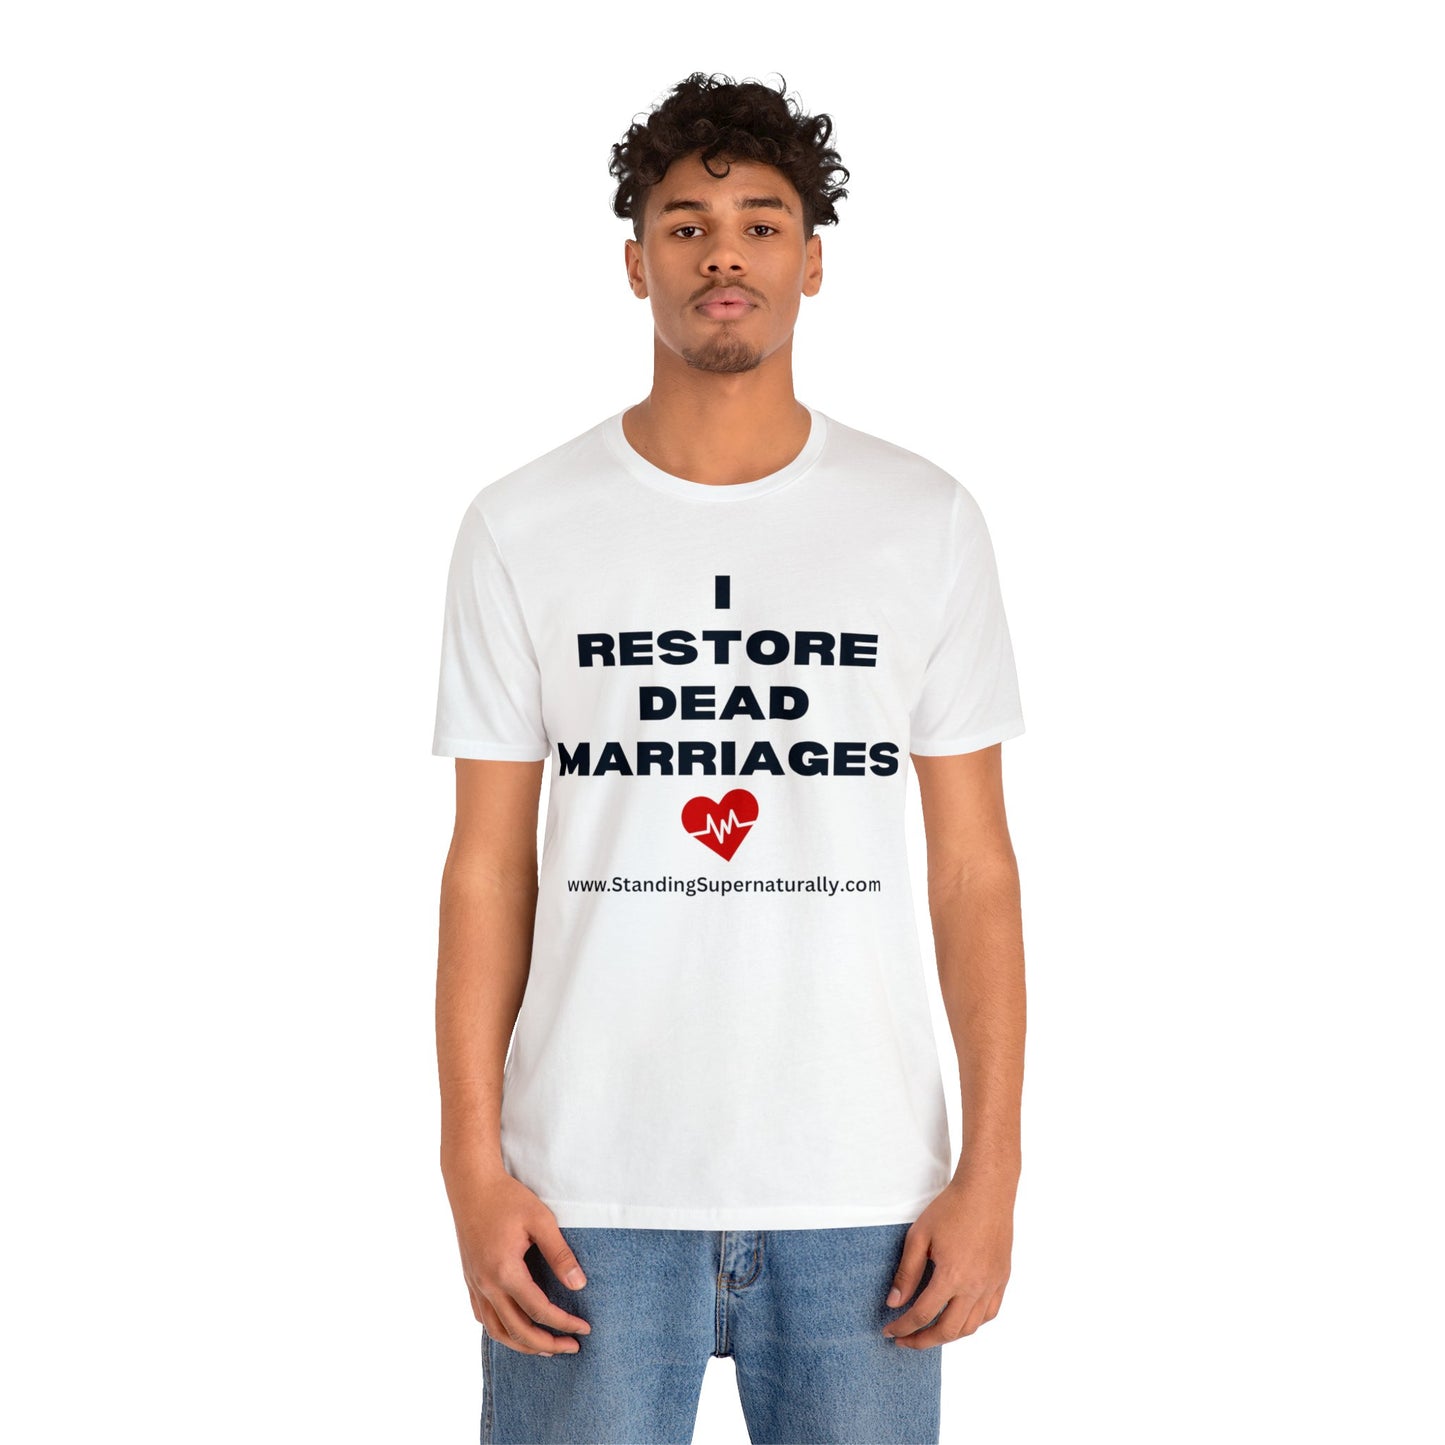 I Restore Dead Marriages - T shirt (White)